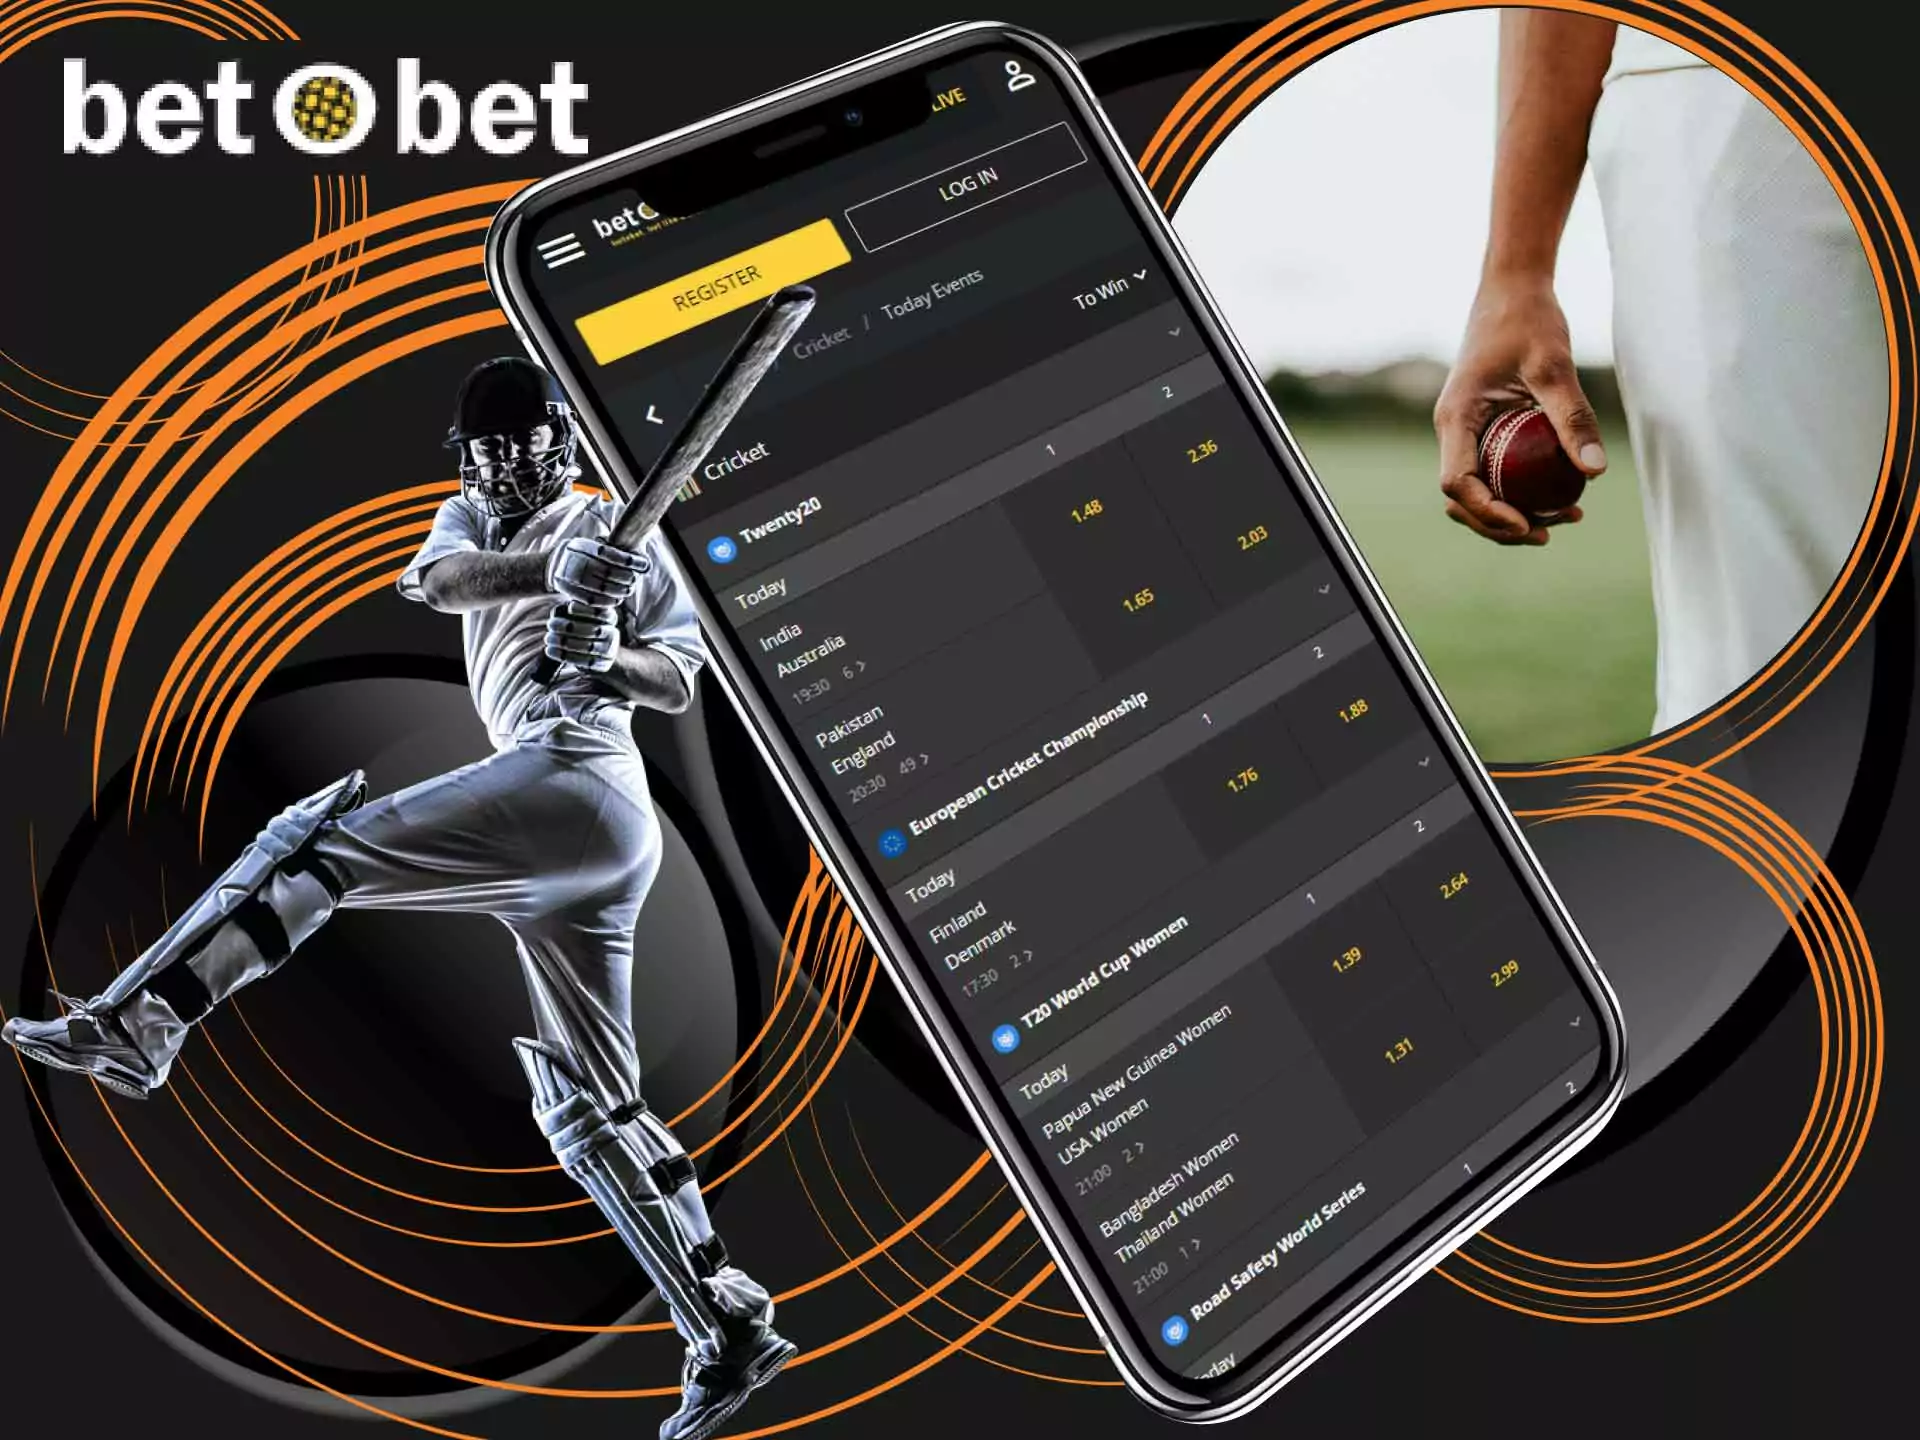 Place bets on the cricket events in the BetOBet app.